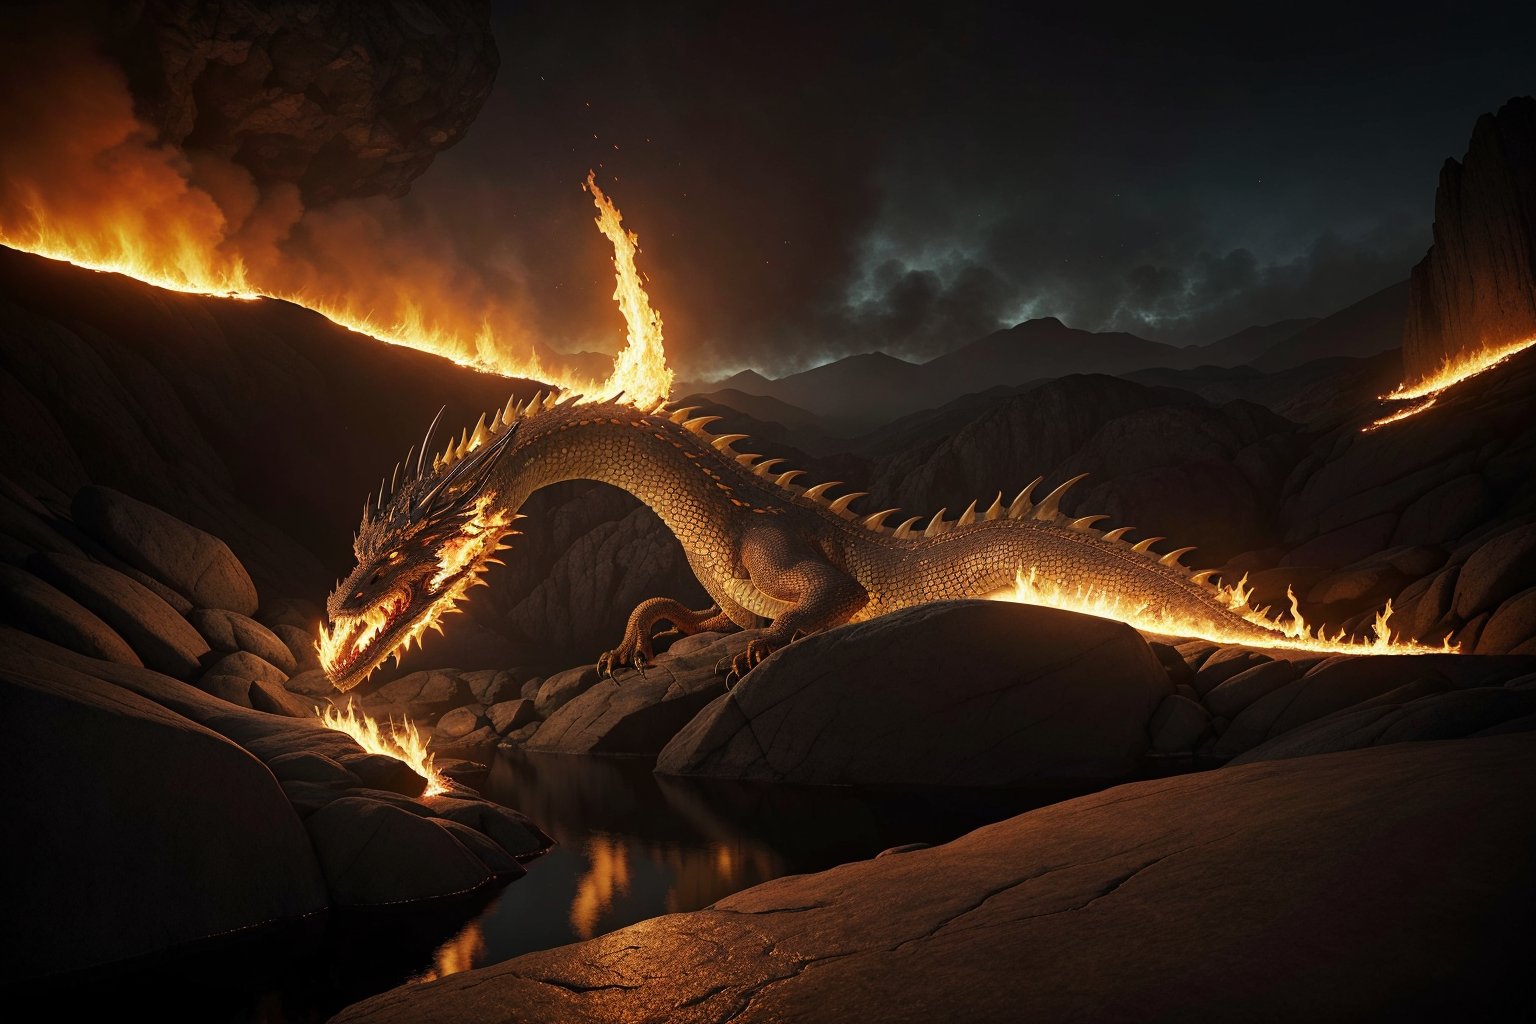 Create an intense and realistic scene where a powerful dragon releases a torrent of fire from its mouth. The dragon should be depicted with intricate scales and glowing eyes, perched on a rocky cliff overlooking a vast, dark landscape. As the dragon breathes fire, the flames should illuminate the surroundings, showcasing the raw power and ferocity of the creature. Include detailed textures of the dragon’s scales, the vibrant and dynamic motion of the fire, and the dramatic lighting effects as the flames cast shadows across the rocky terrain.,photorealistic